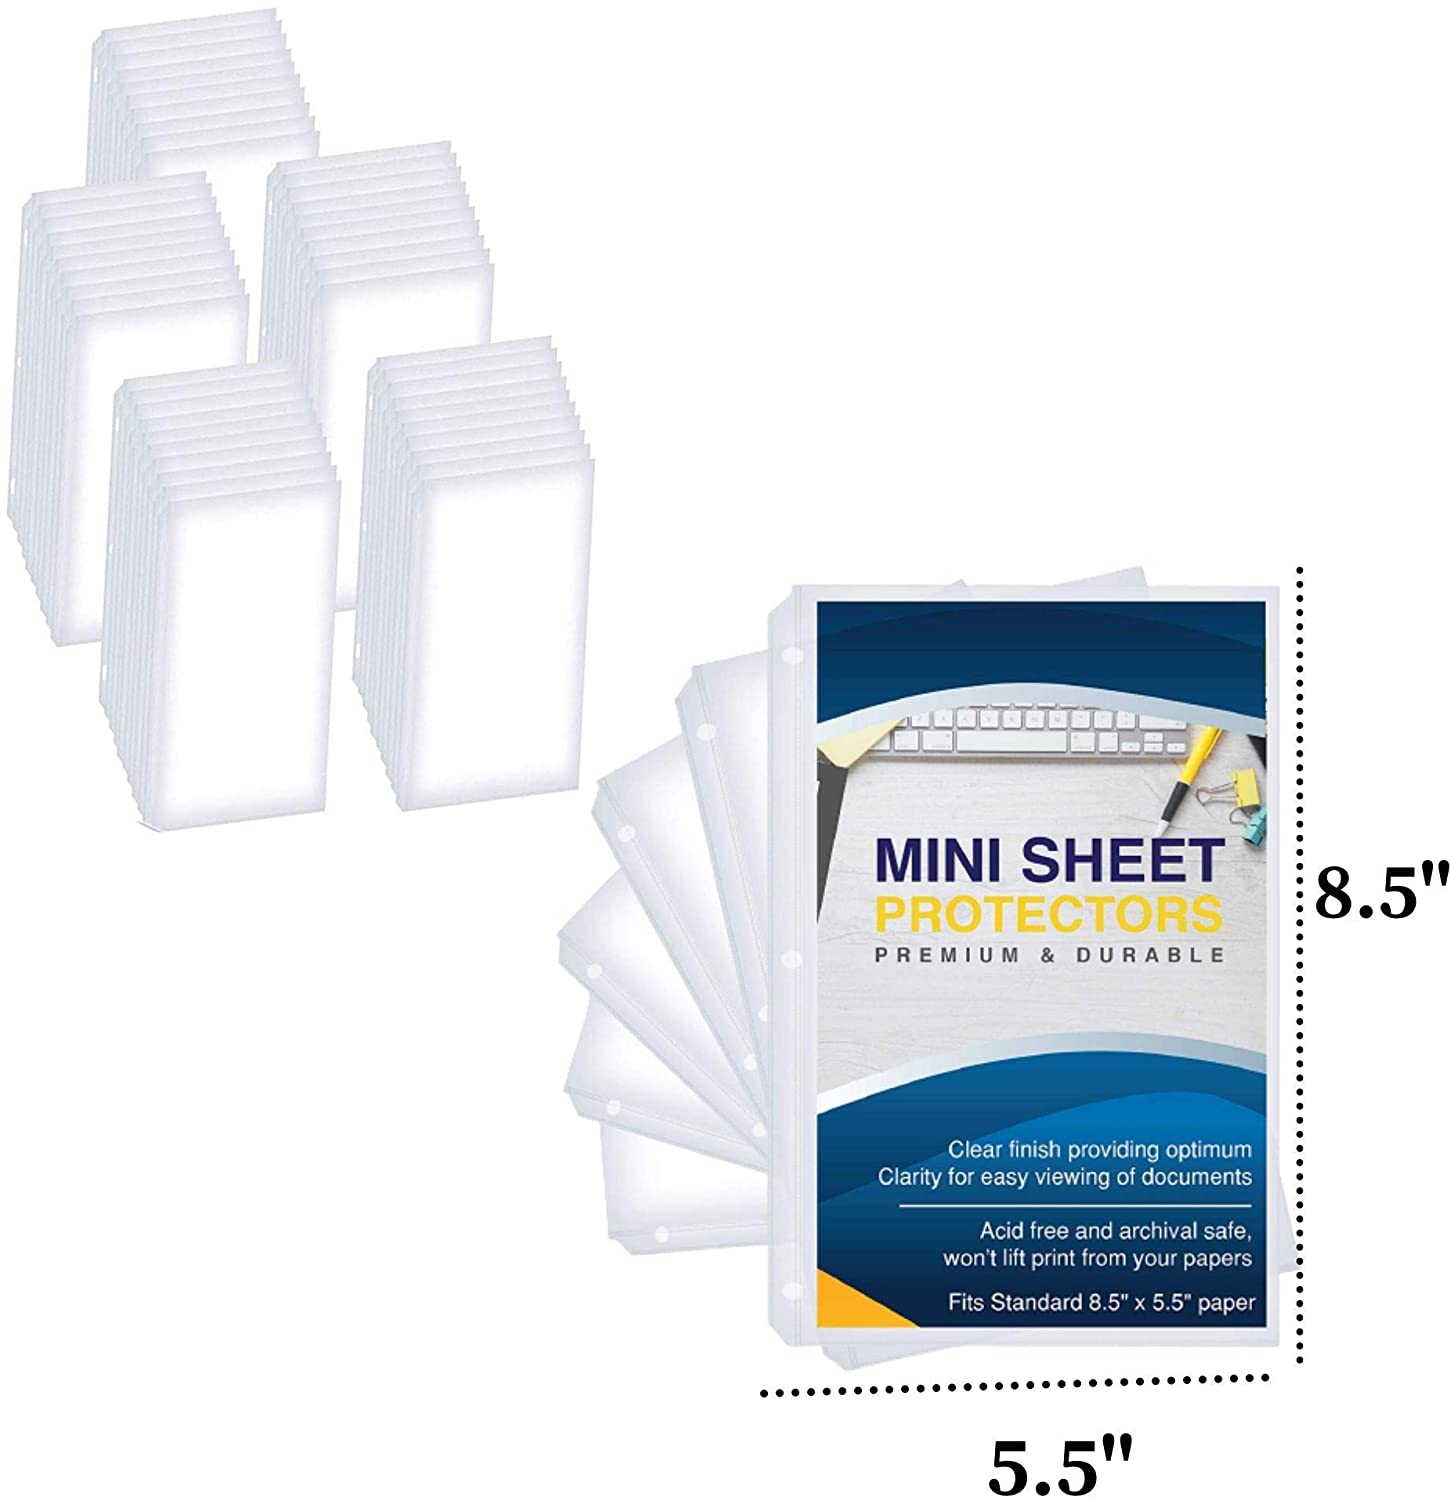 Heavyweight Clear Mini Sheet Protectors, 5.5" x 8.5", Top Load, Reinforced Holes, Acid-Free/Archival Safe - 200 Pack